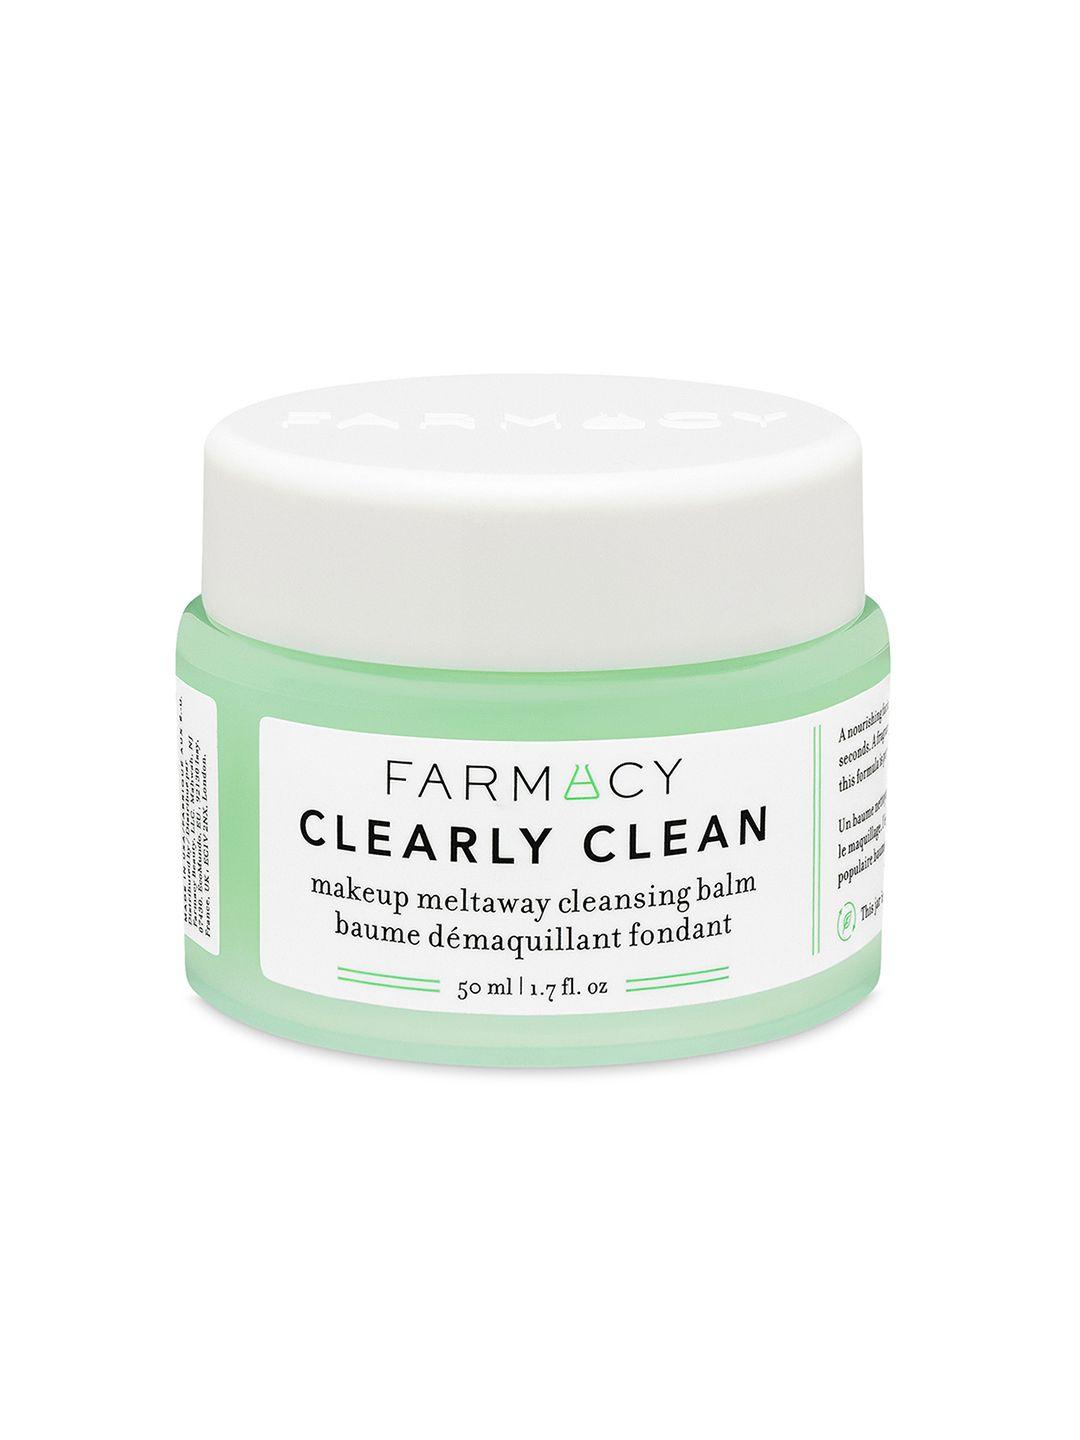 farmacy beauty clearly clean makeup meltaway cleansing balm - 50 ml